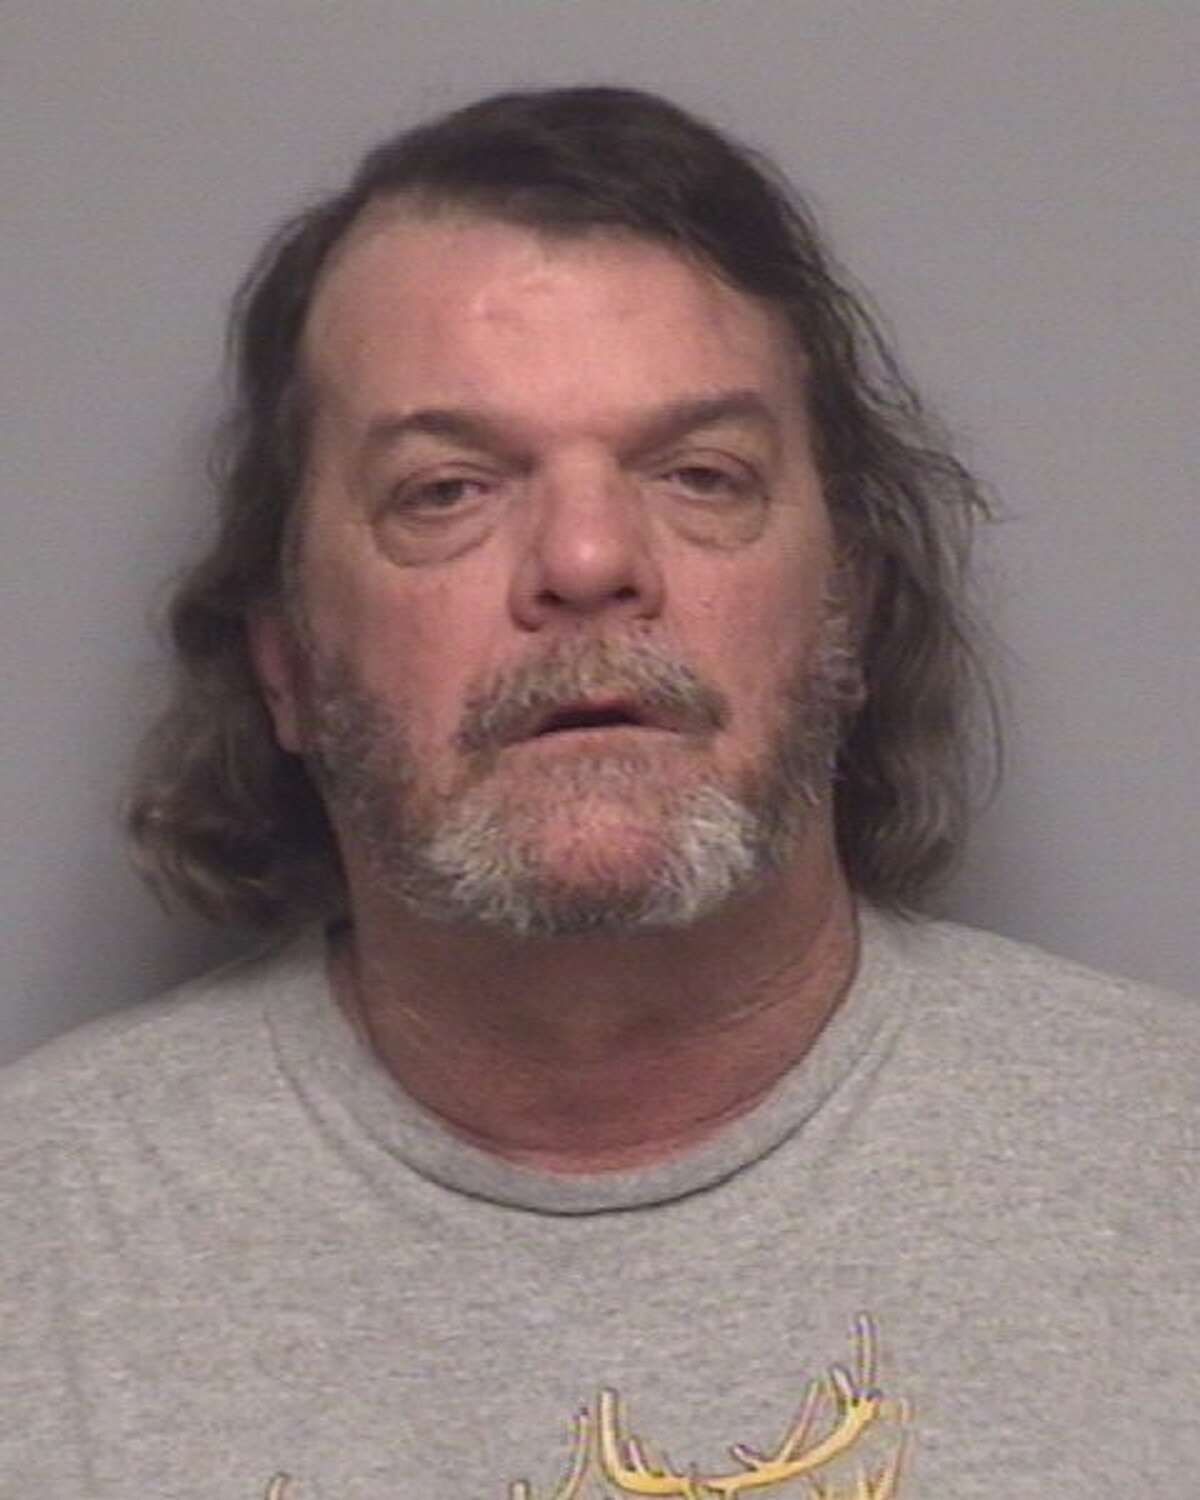 Richard Allen Ward, 53, was arrested Monday, Jan. 30, 2017, and charged with murder in the death of his wife, Cynthia Thompson.